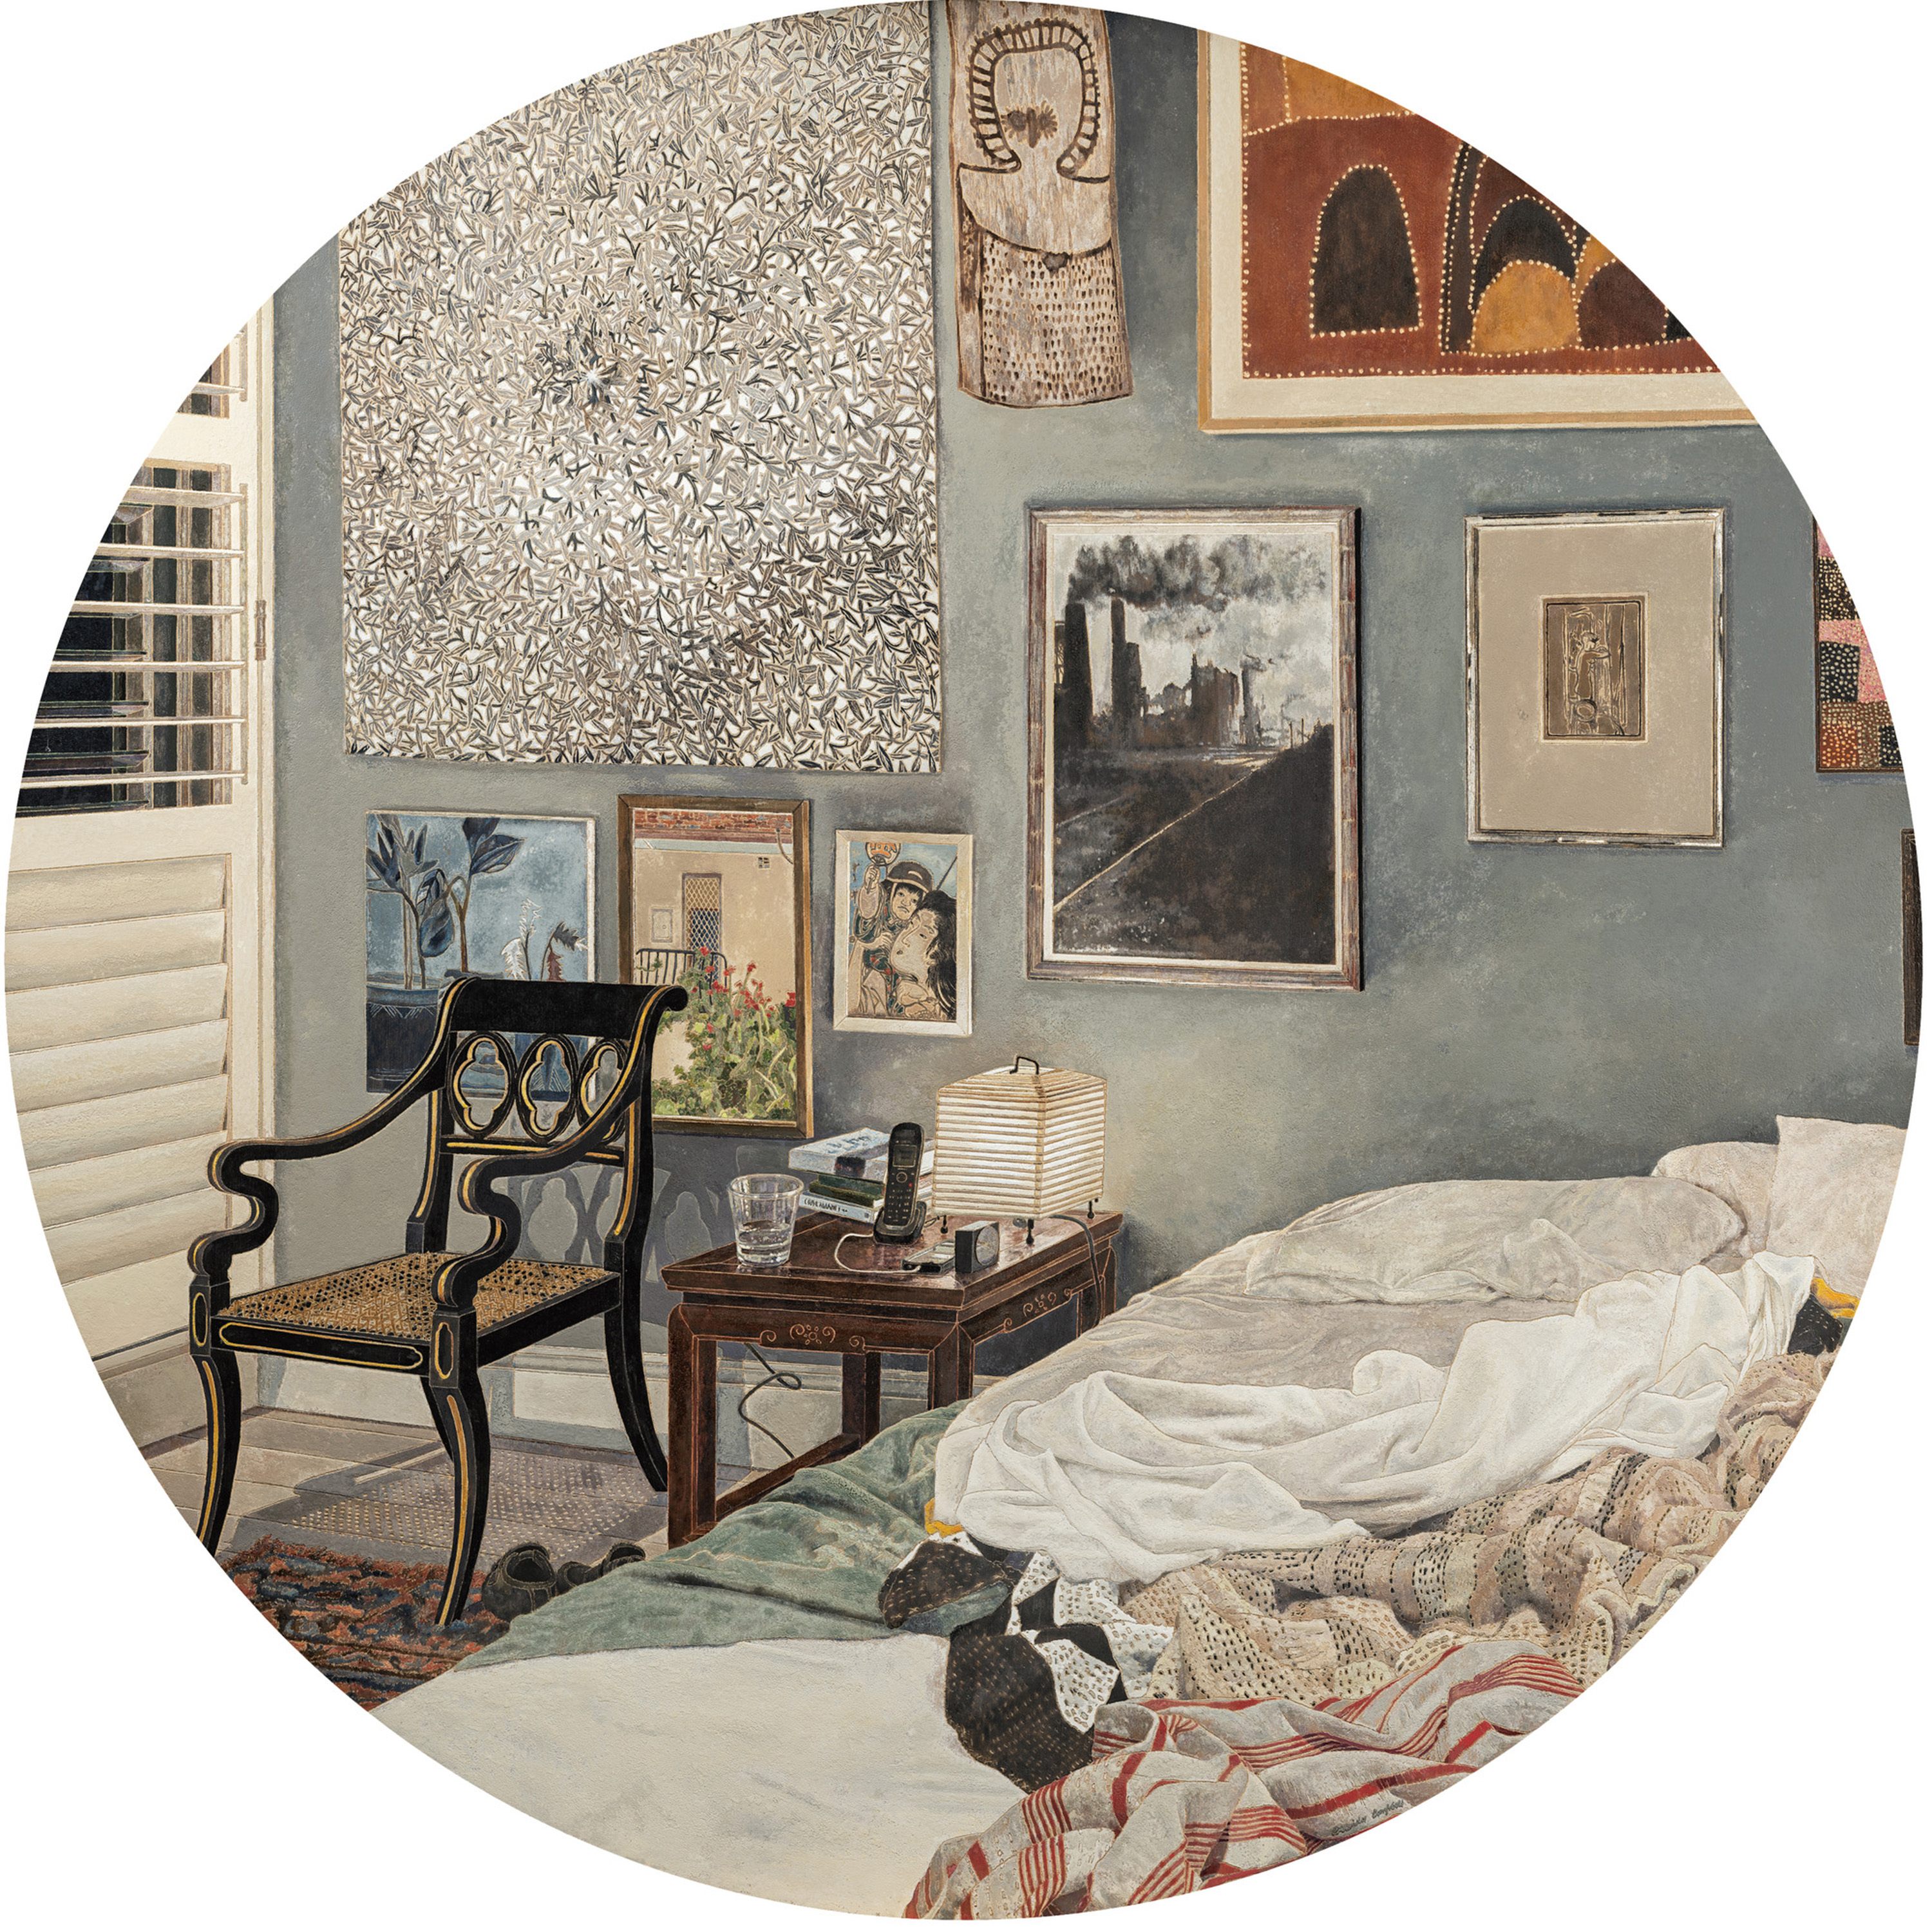 A circular painting of a bedroom, including a sleeper bed, bedside table, a chair and a wall covered in art